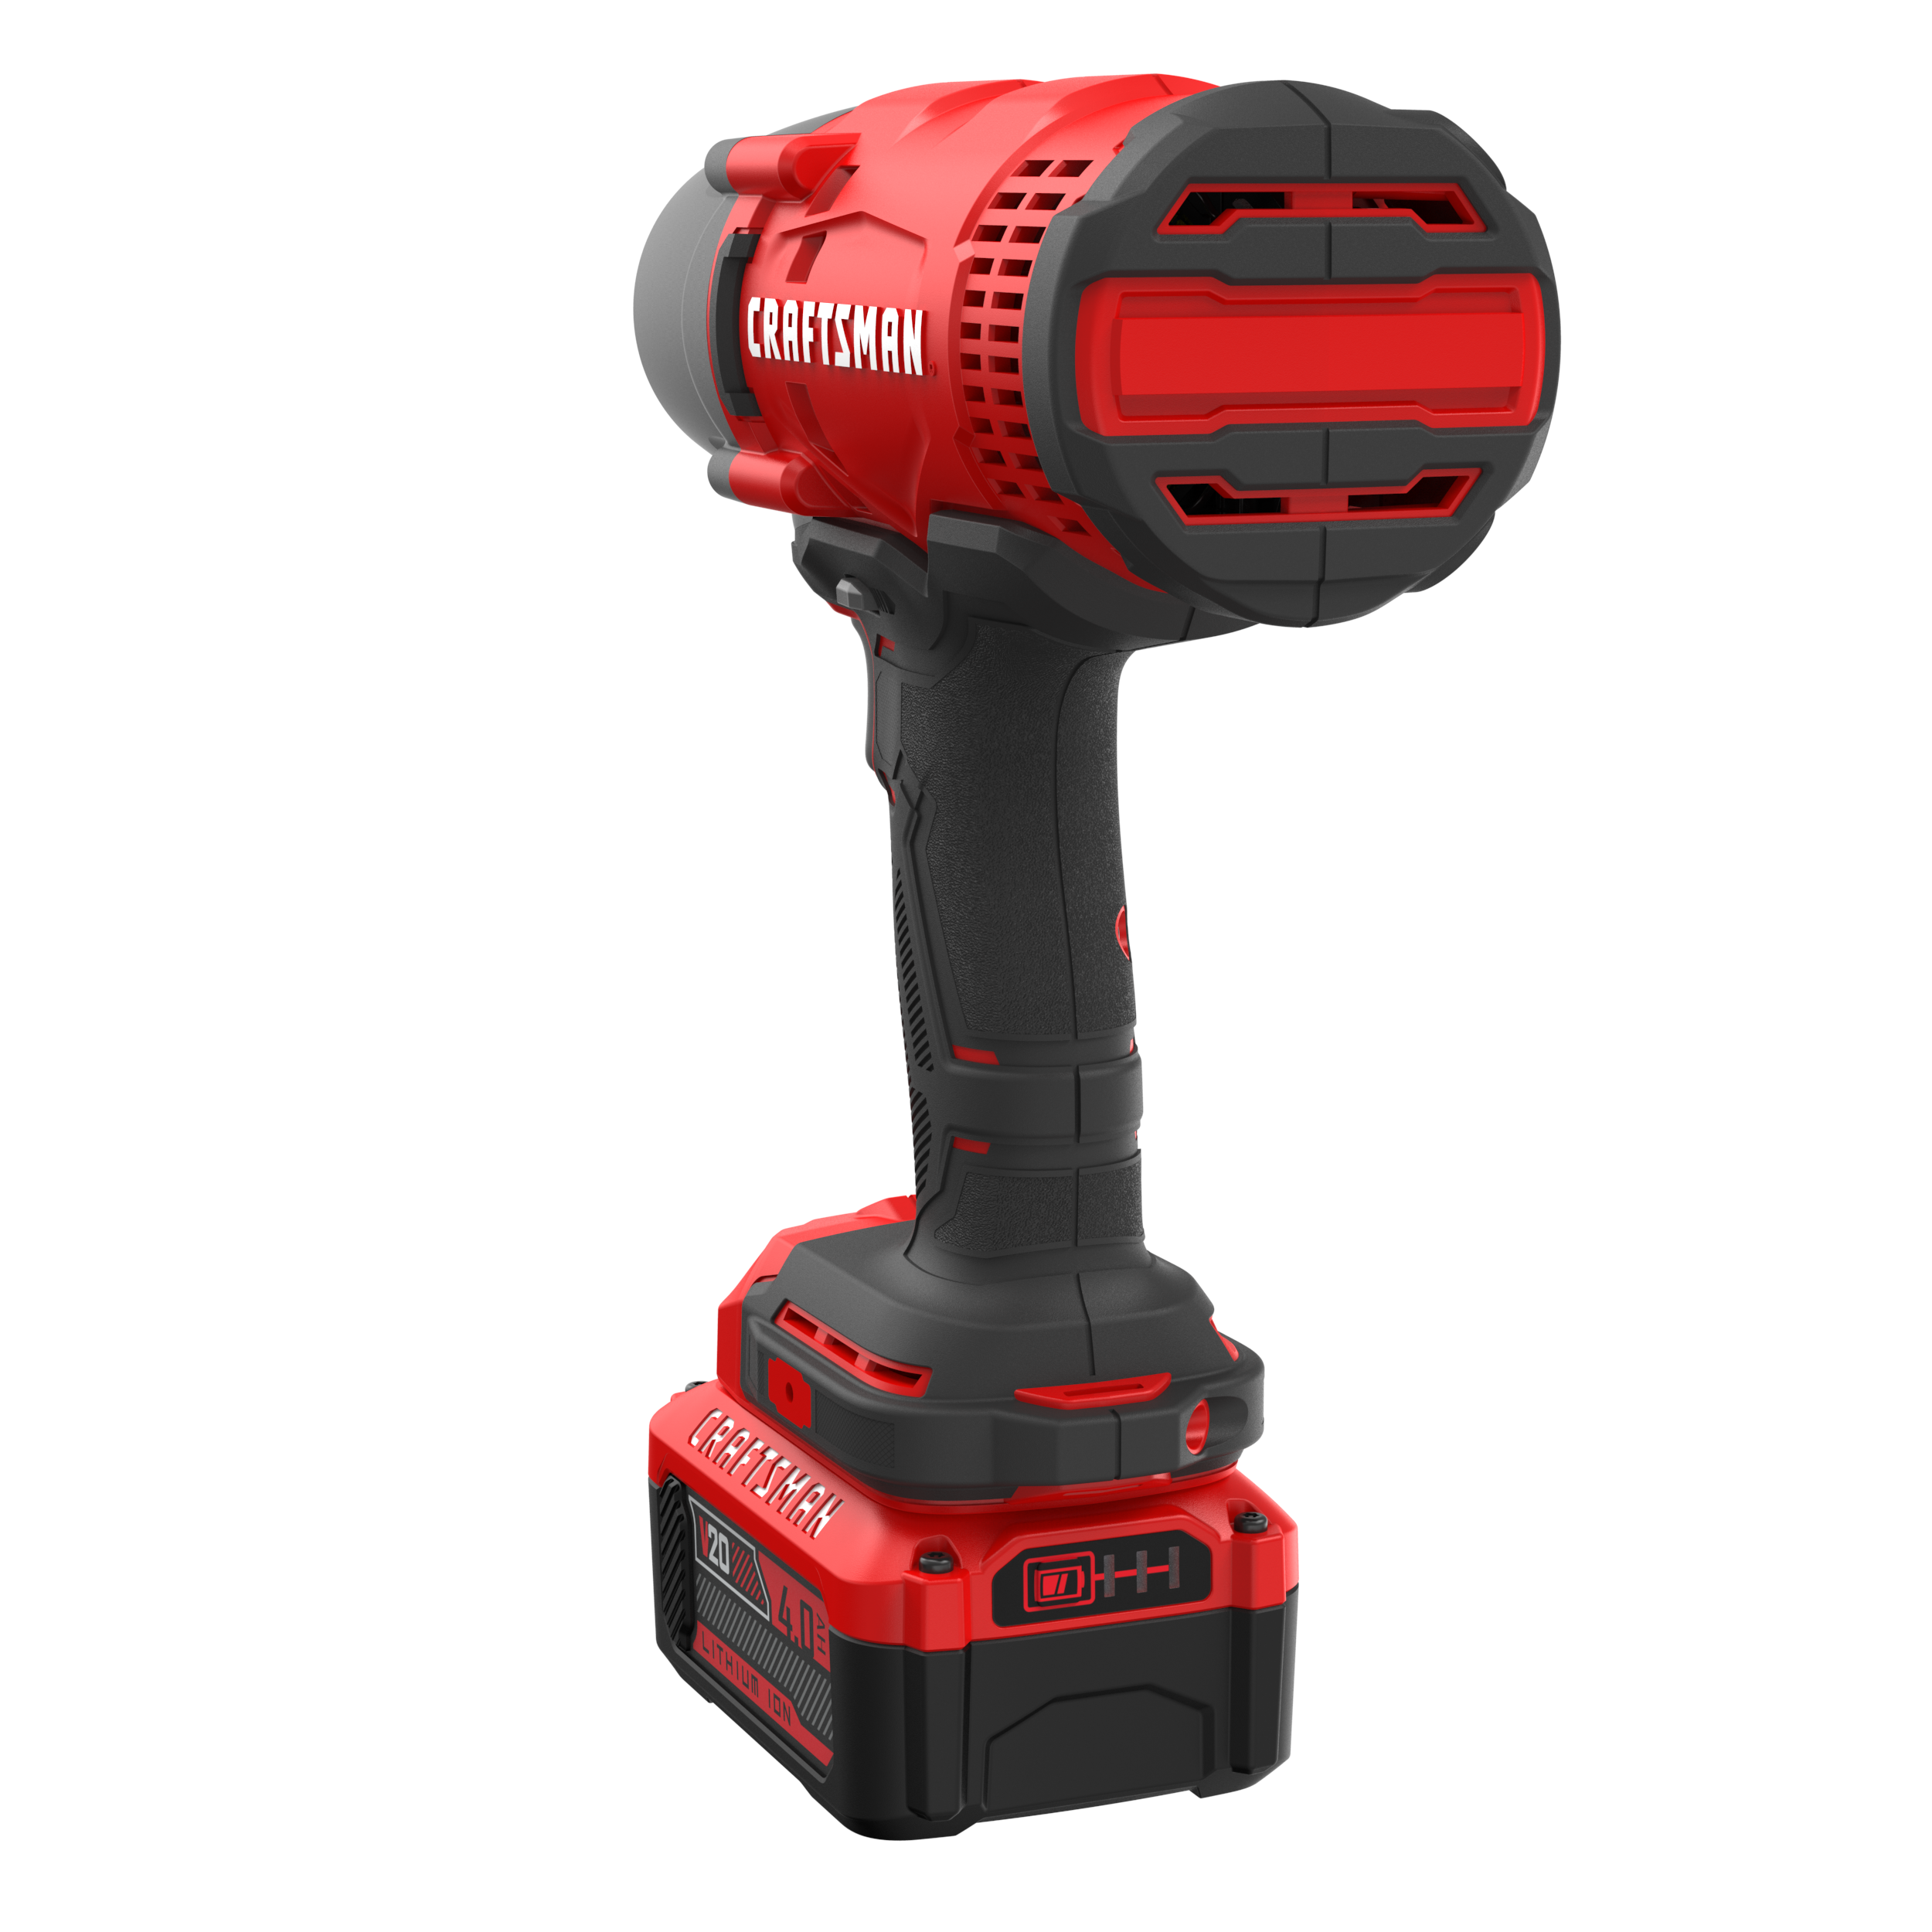 V20* Cordless 1/2-in Impact Wrench Kit (1 Battery) | CRAFTSMAN